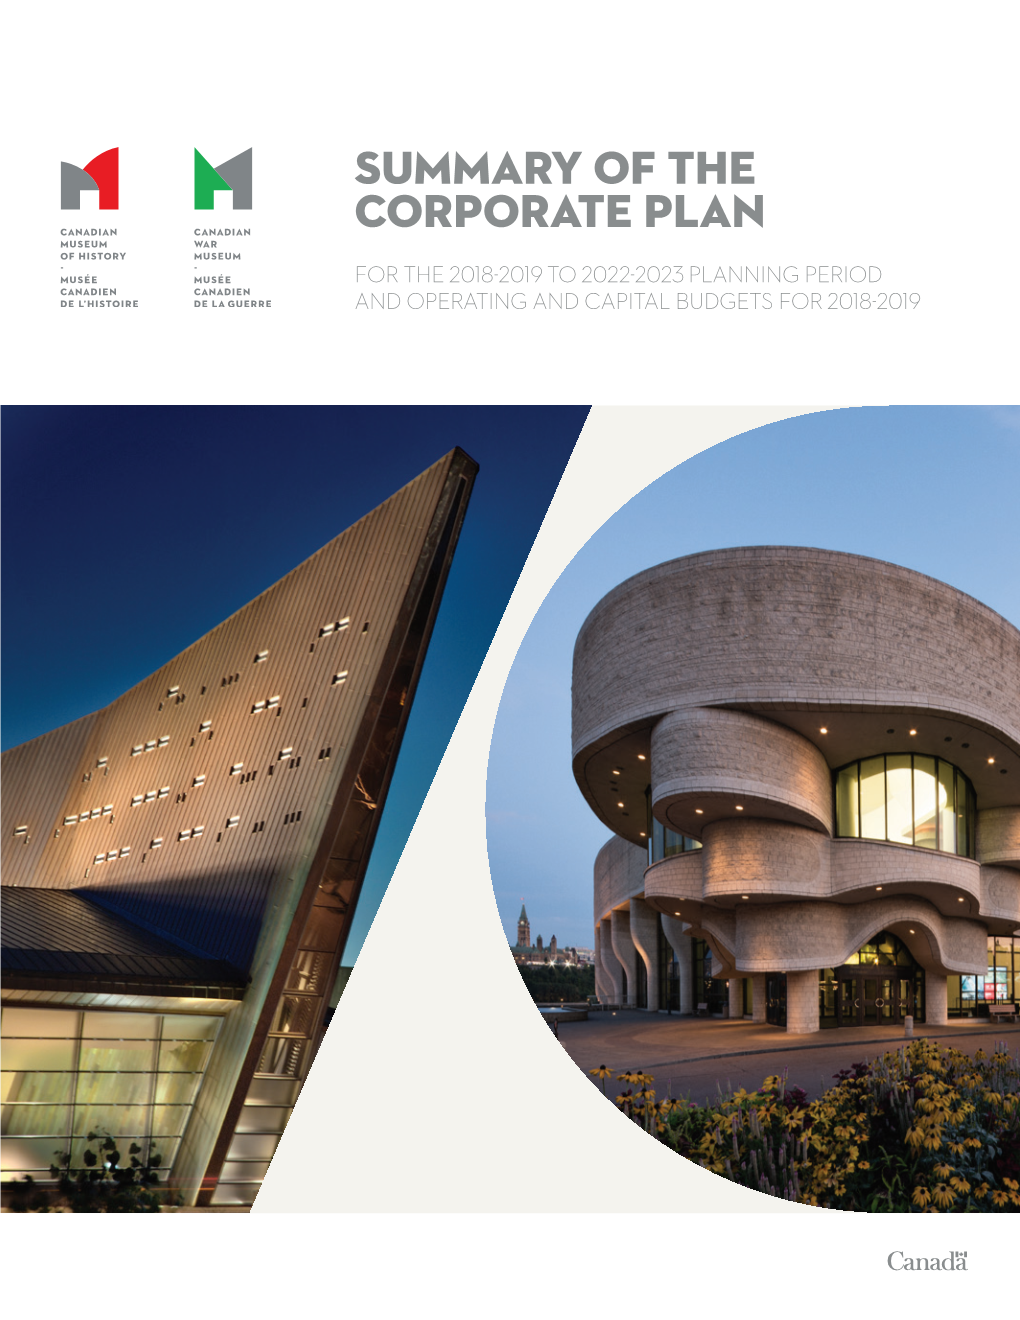 Summary of the Corporate Plan for the 2018-2019 to 2022-2023 Planning Period and Operating and Capital Budgets for 2018-2019